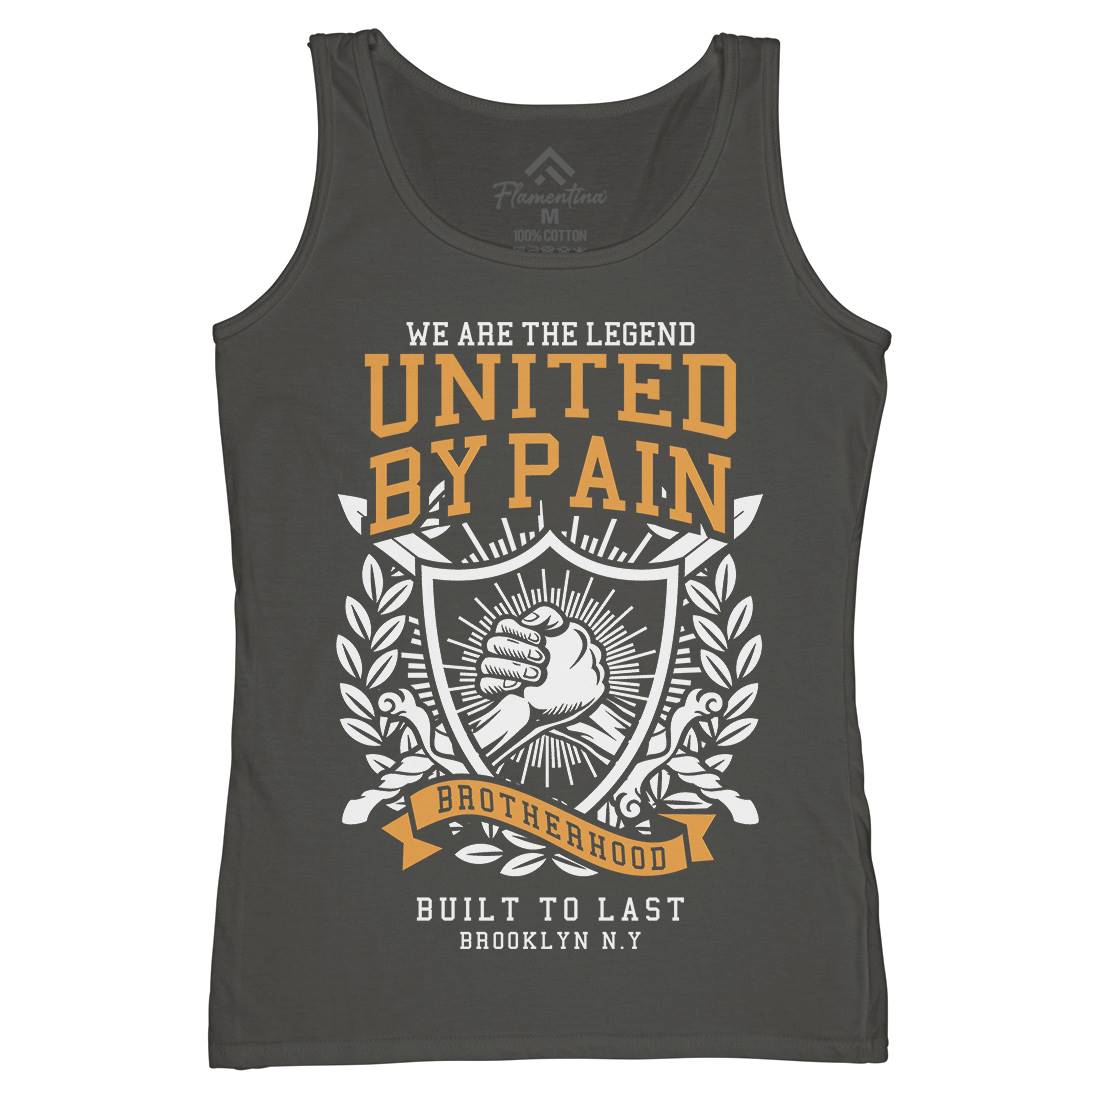 United By Pain Womens Organic Tank Top Vest Gym A297